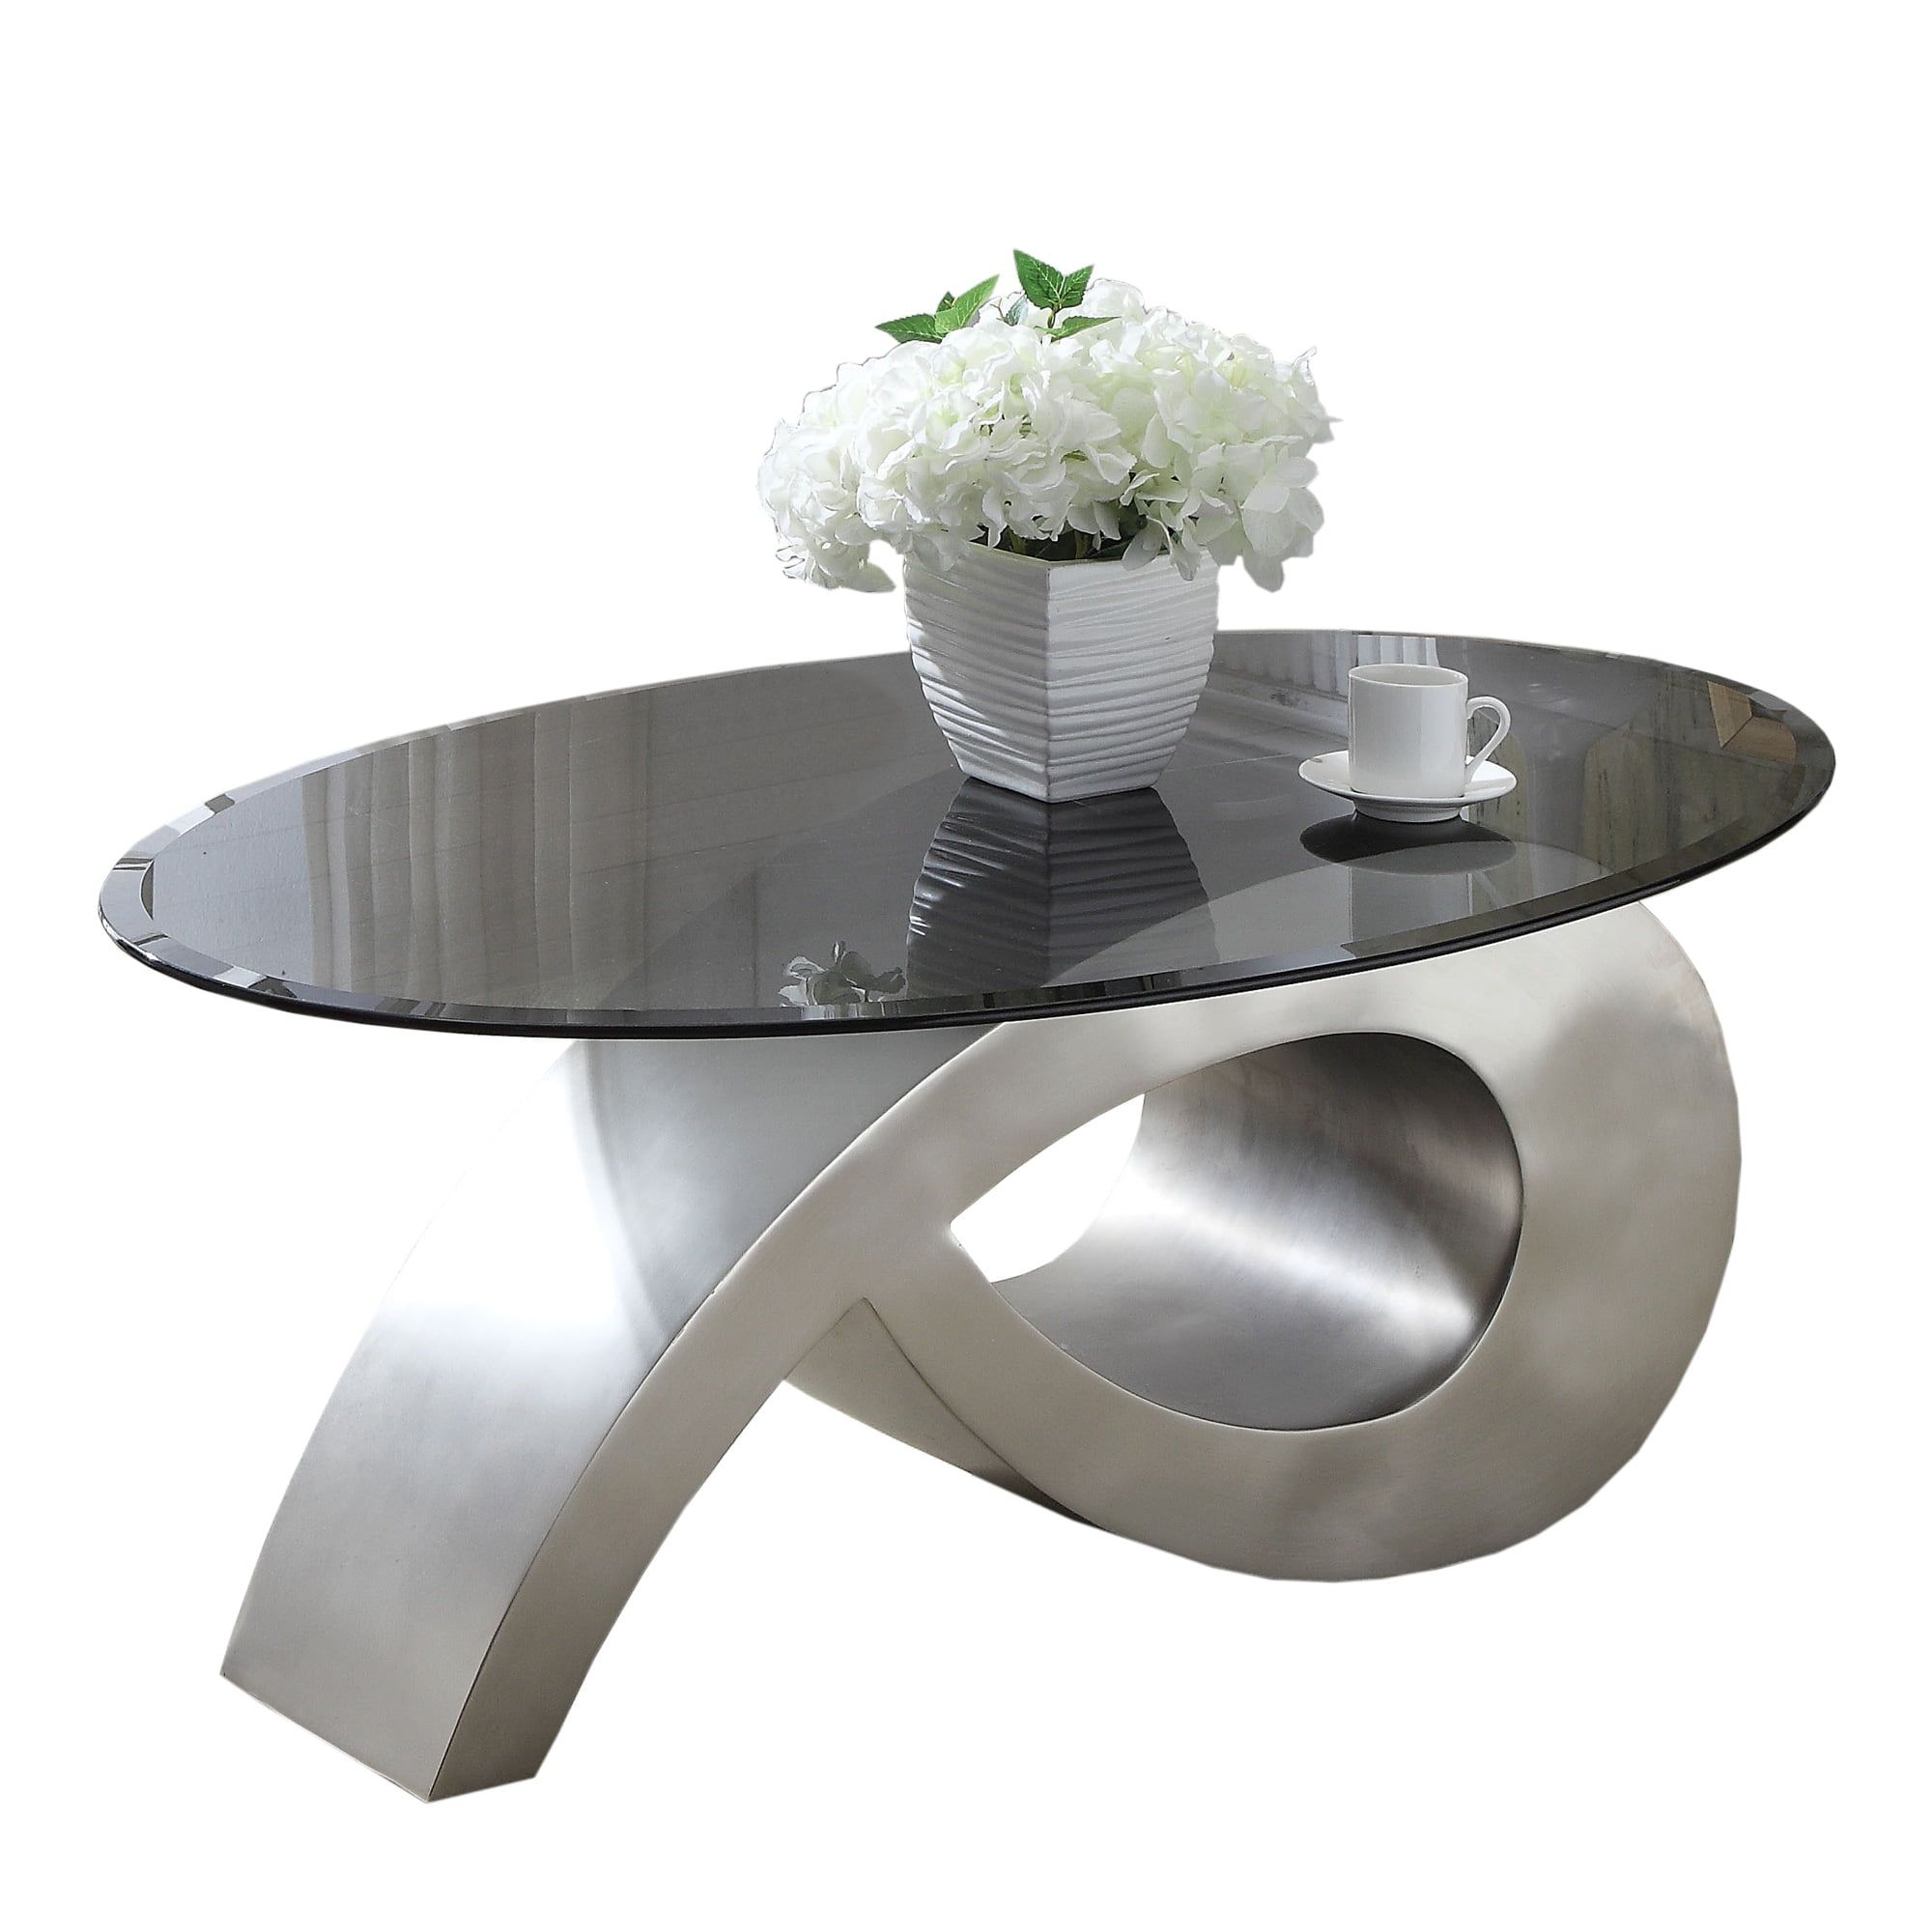 Oval Glass Coffee Table With Unique Metal Base, Black And Silver With Regard To Oval Glass Coffee Tables (View 12 of 15)